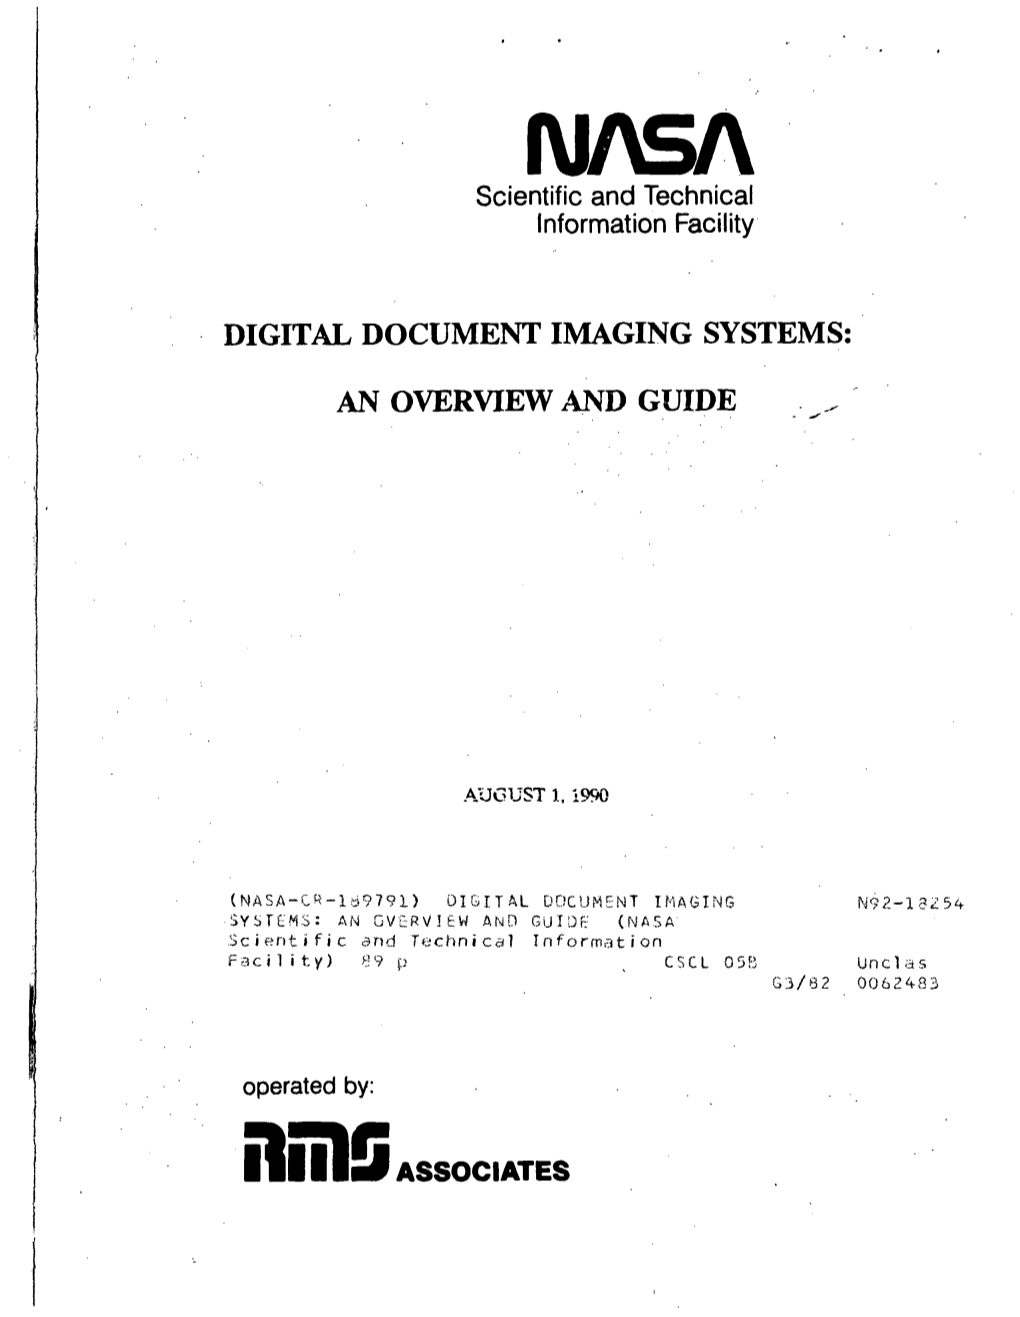 Digital Document Imaging Systems